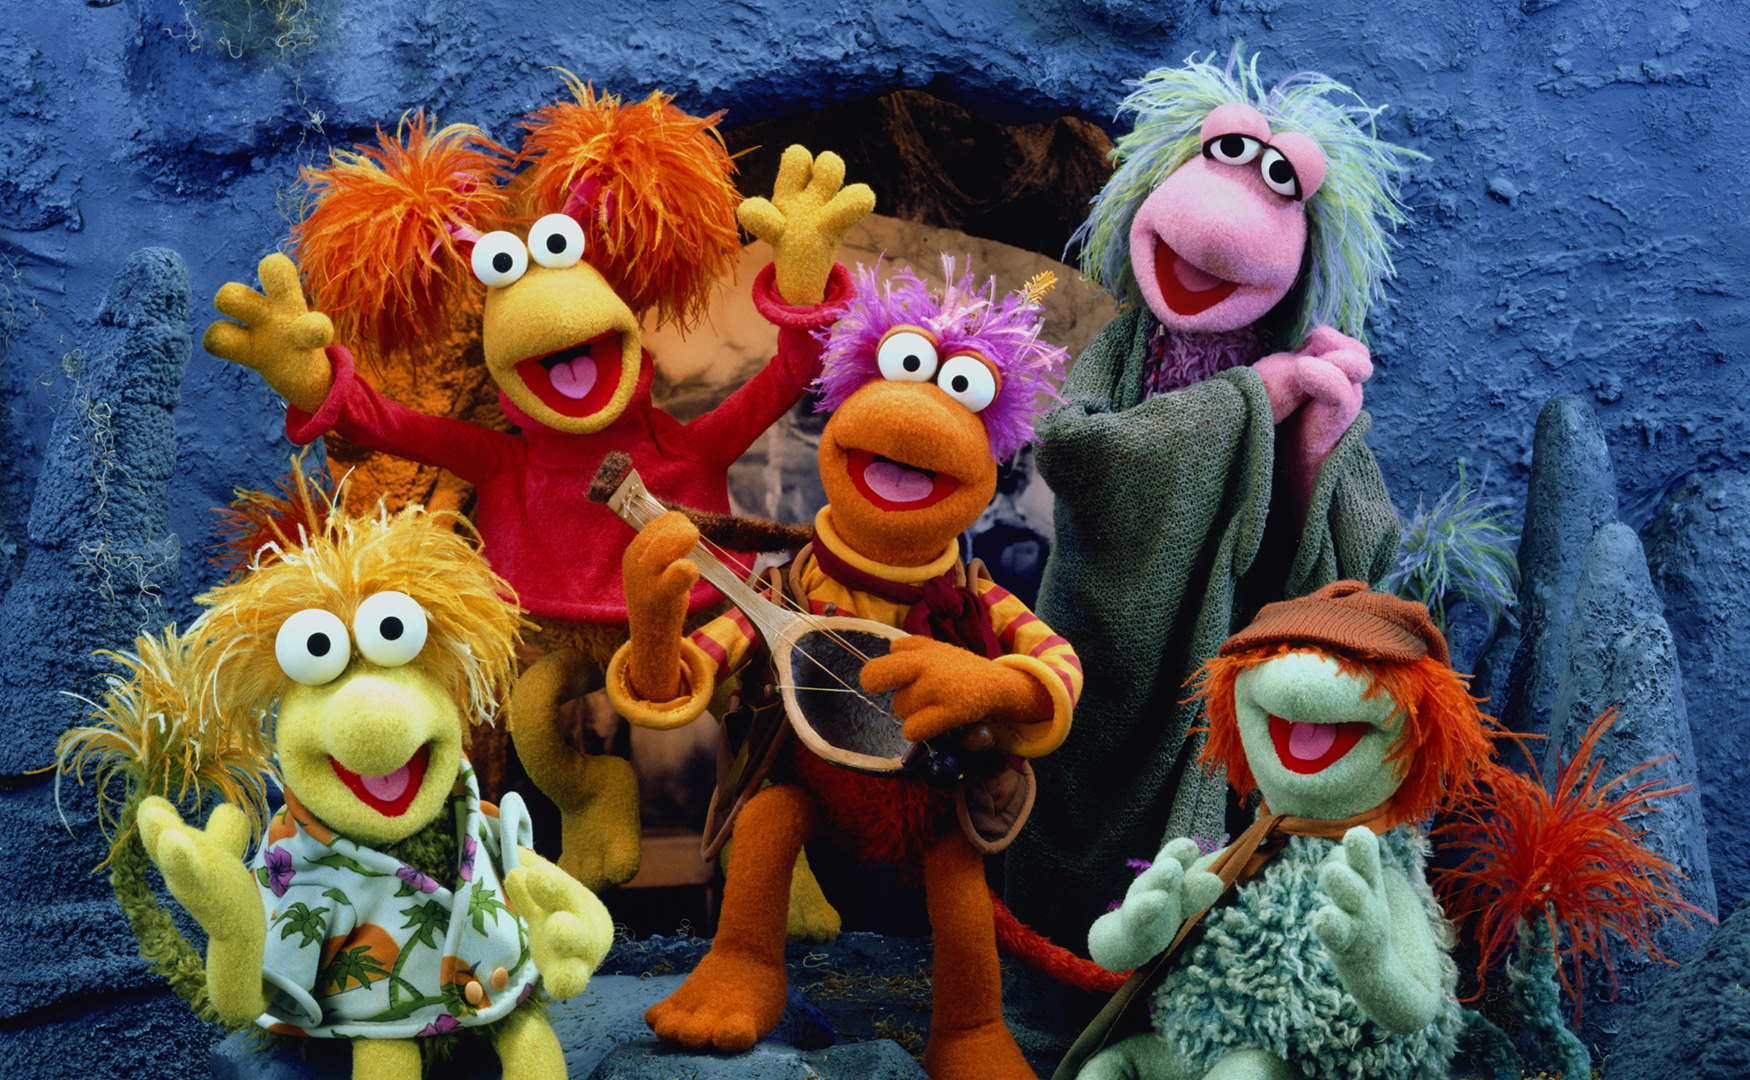 Some Jim Henson Shows Are Now Streaming on Amazon Prime